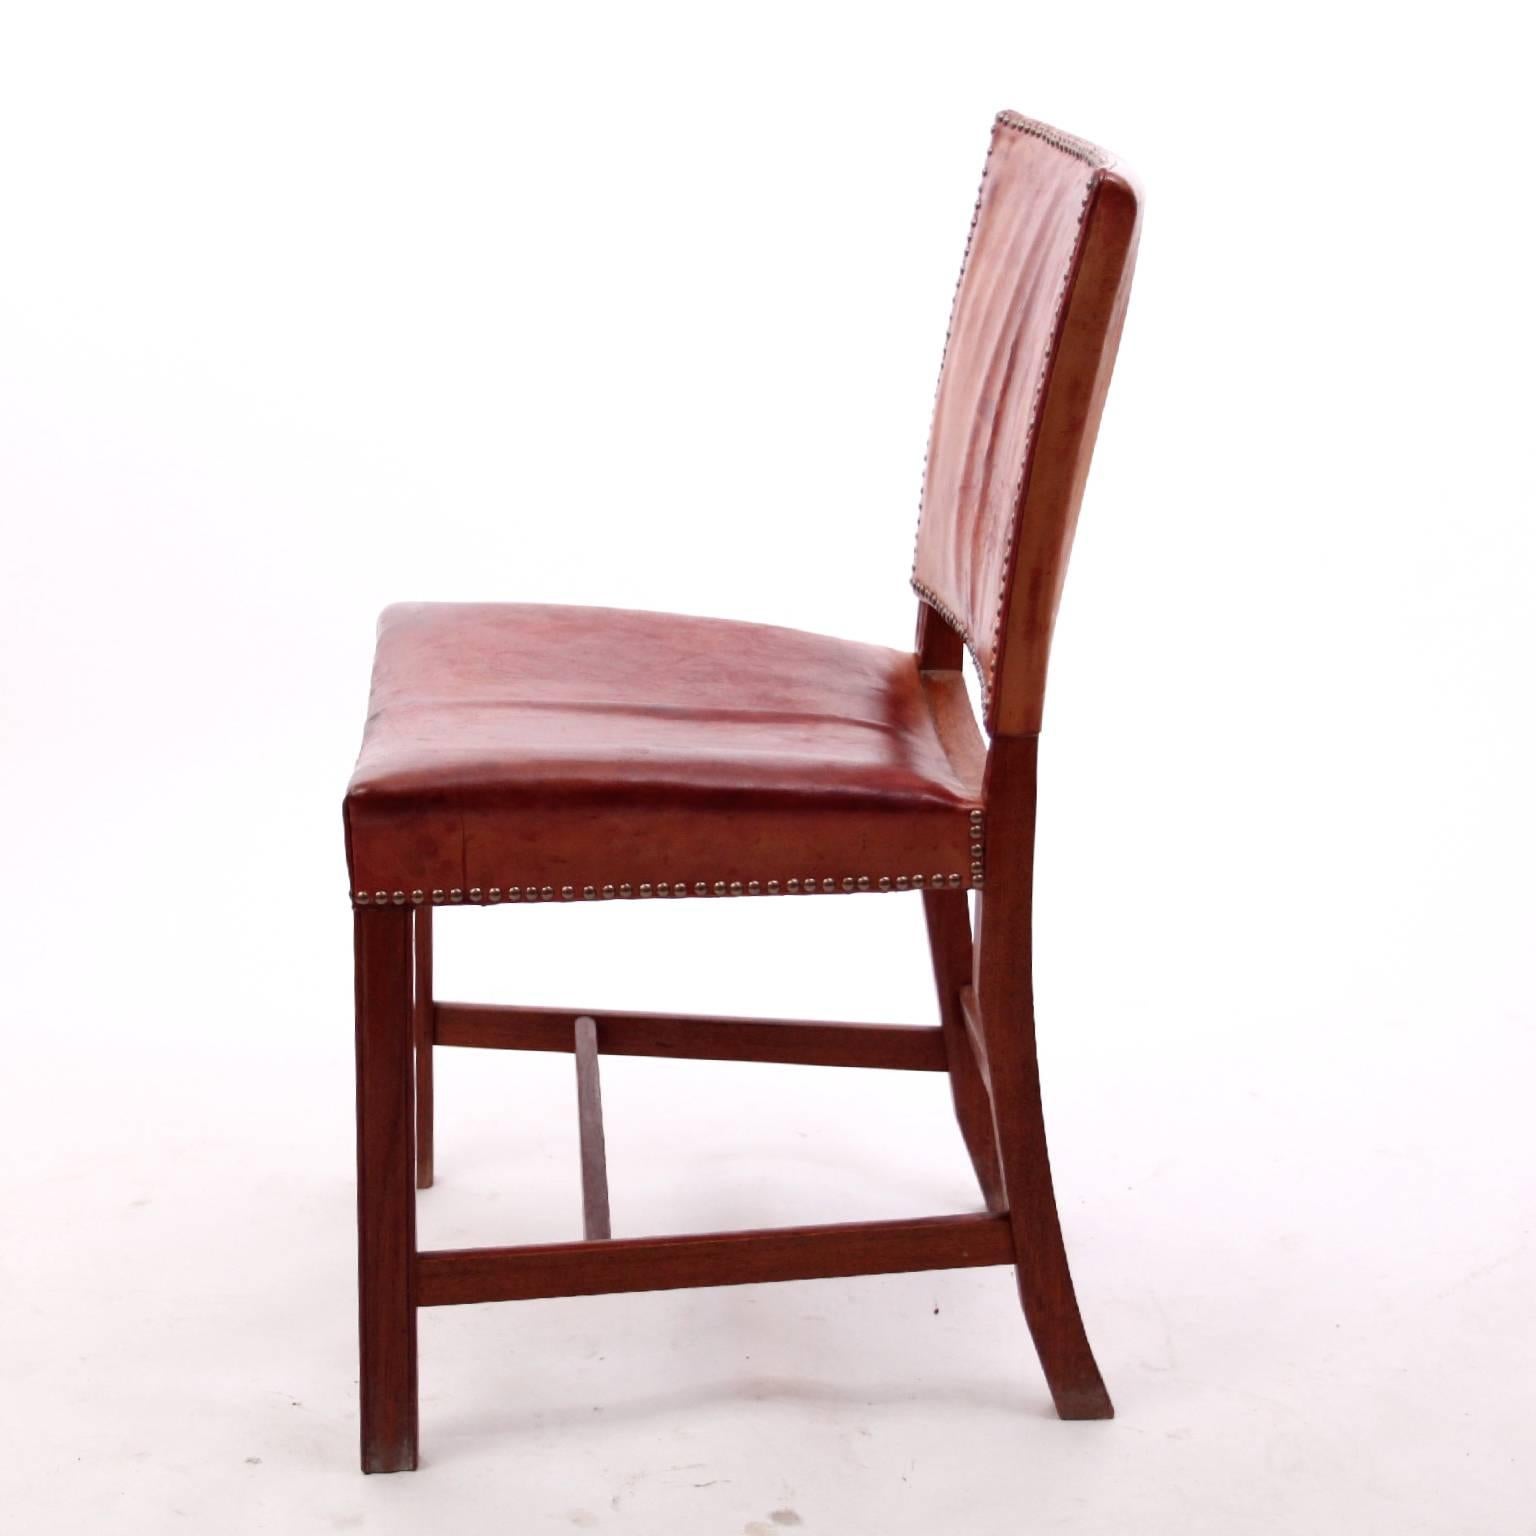 KAARE KLINT & RUD RASMUSSEN - MID-CENTURY MODERN DESIGN / SCANDINAVIAN MODERN

A set of three of the icomic Kaare Klint 'Red Chairs' or 'Barcelona Chairs'

Profiled legs of Cuban mahogany, seat and back upholstered with original red leather and